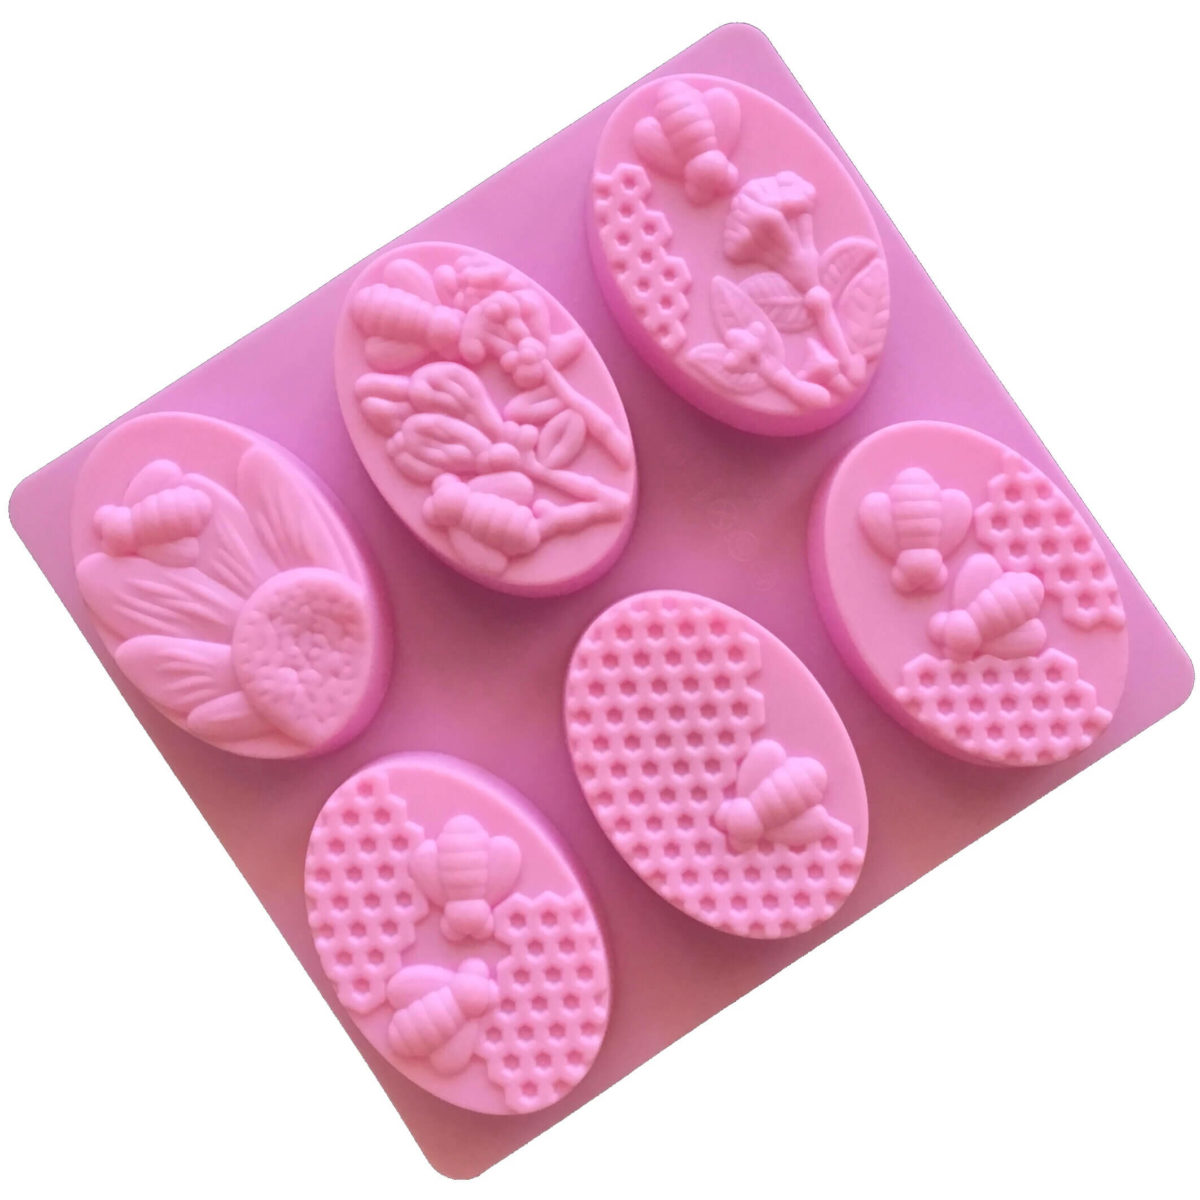 pink silicone mould with six cavites each with a different honey bee theme